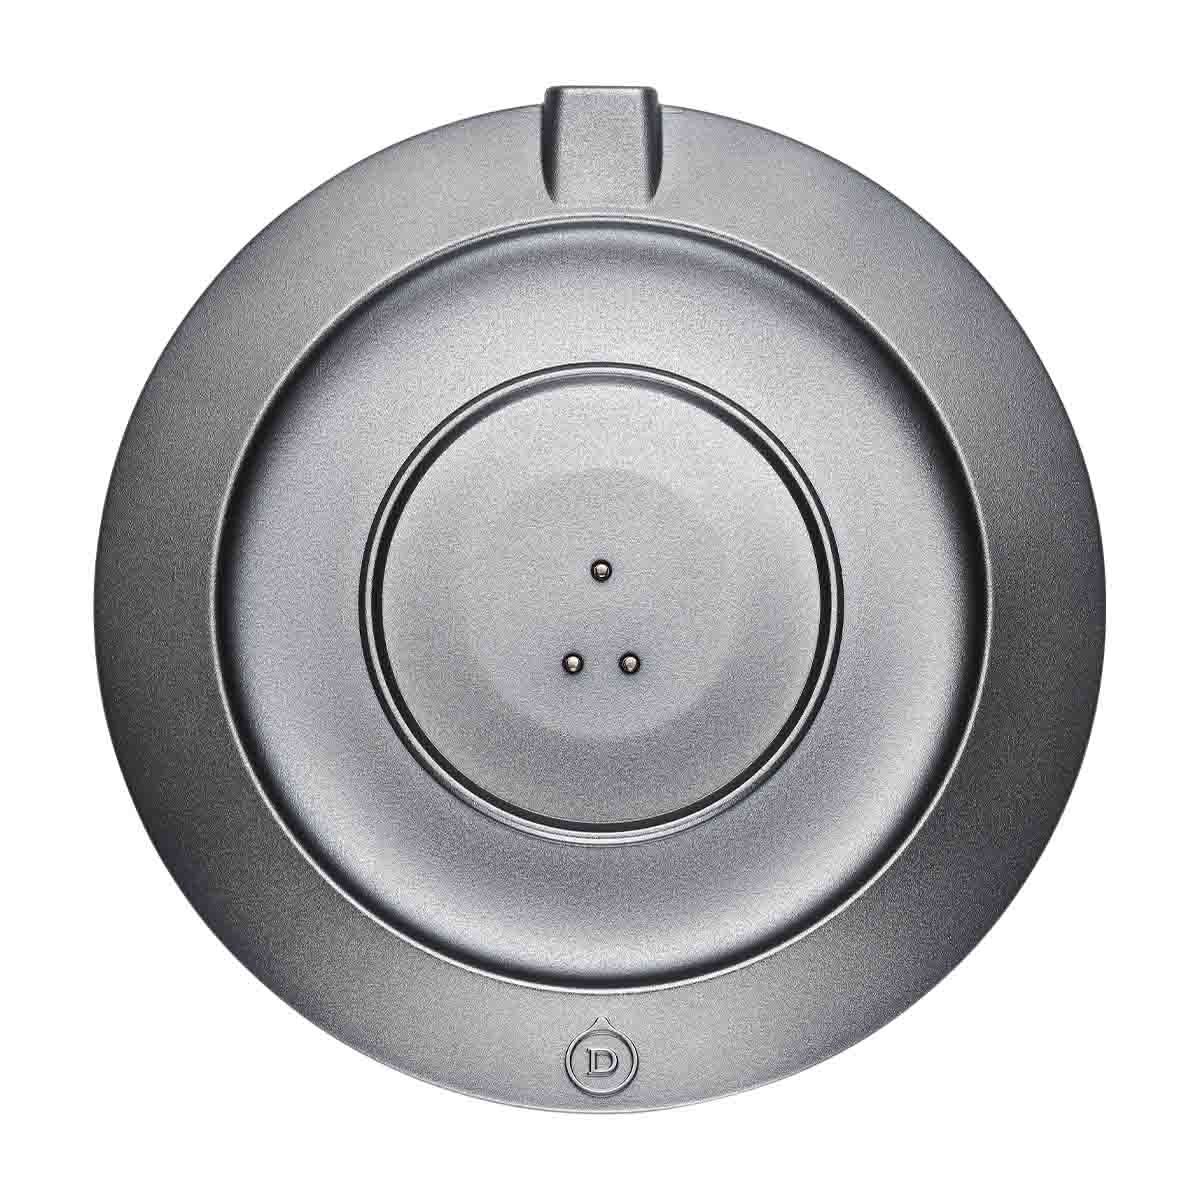 Devialet Mania Wireless Charging Station - Gray - top view